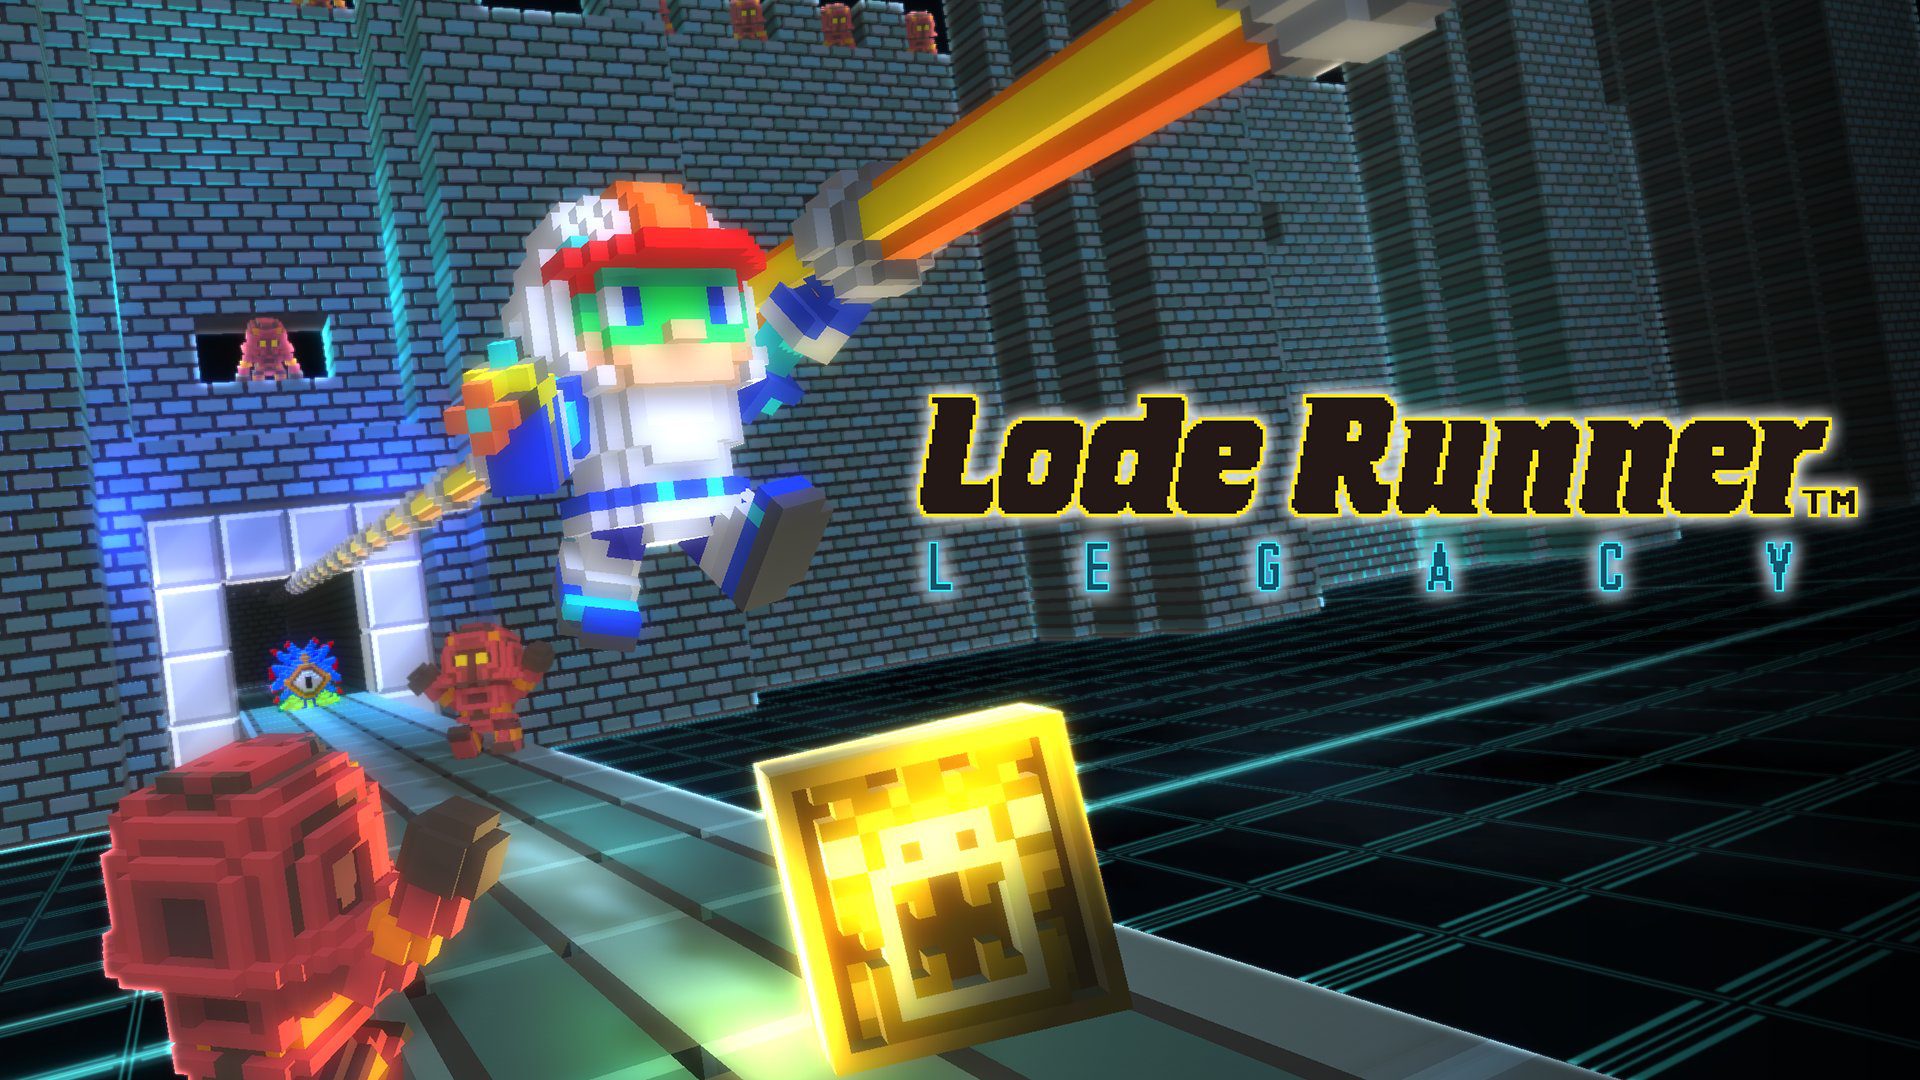 Lode Runner Legacy Comes To PS4